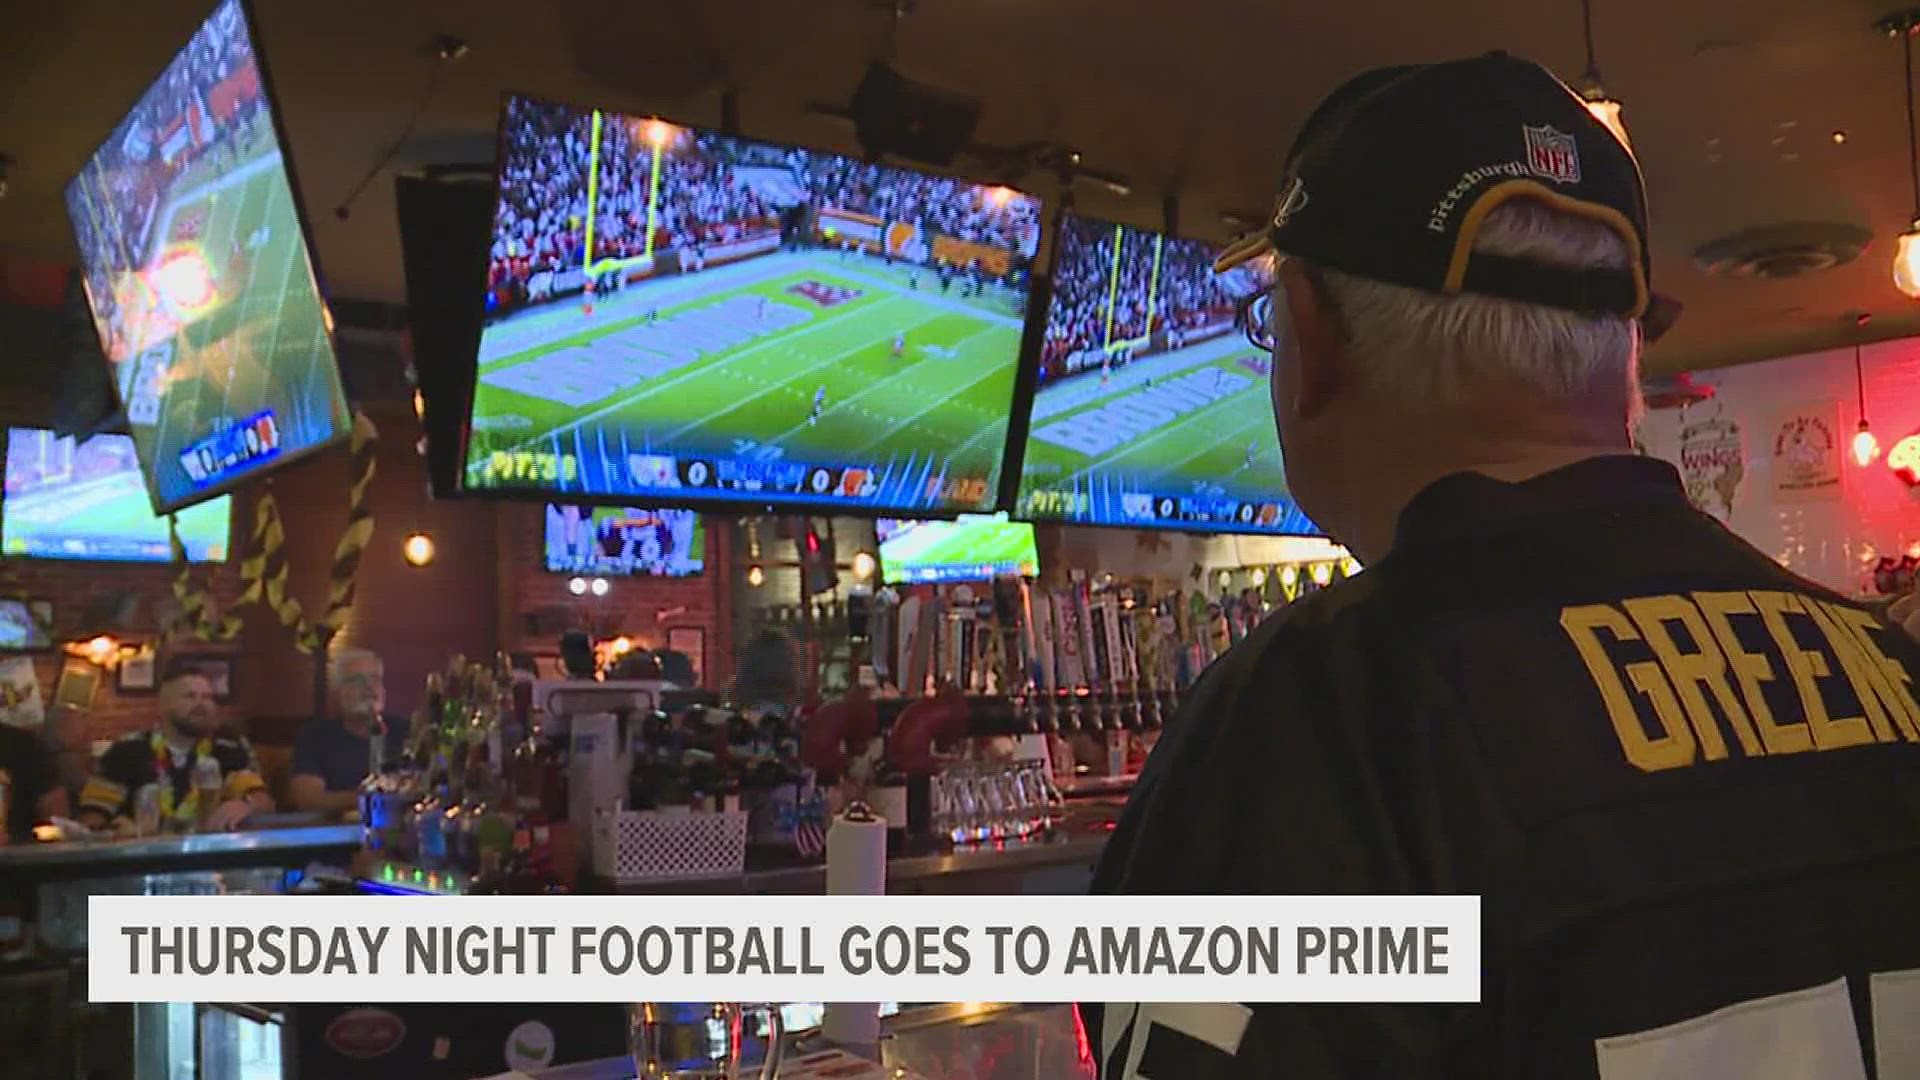 Sports fans have mixed reactions on 'Thursday Night Football' moving to   Prime